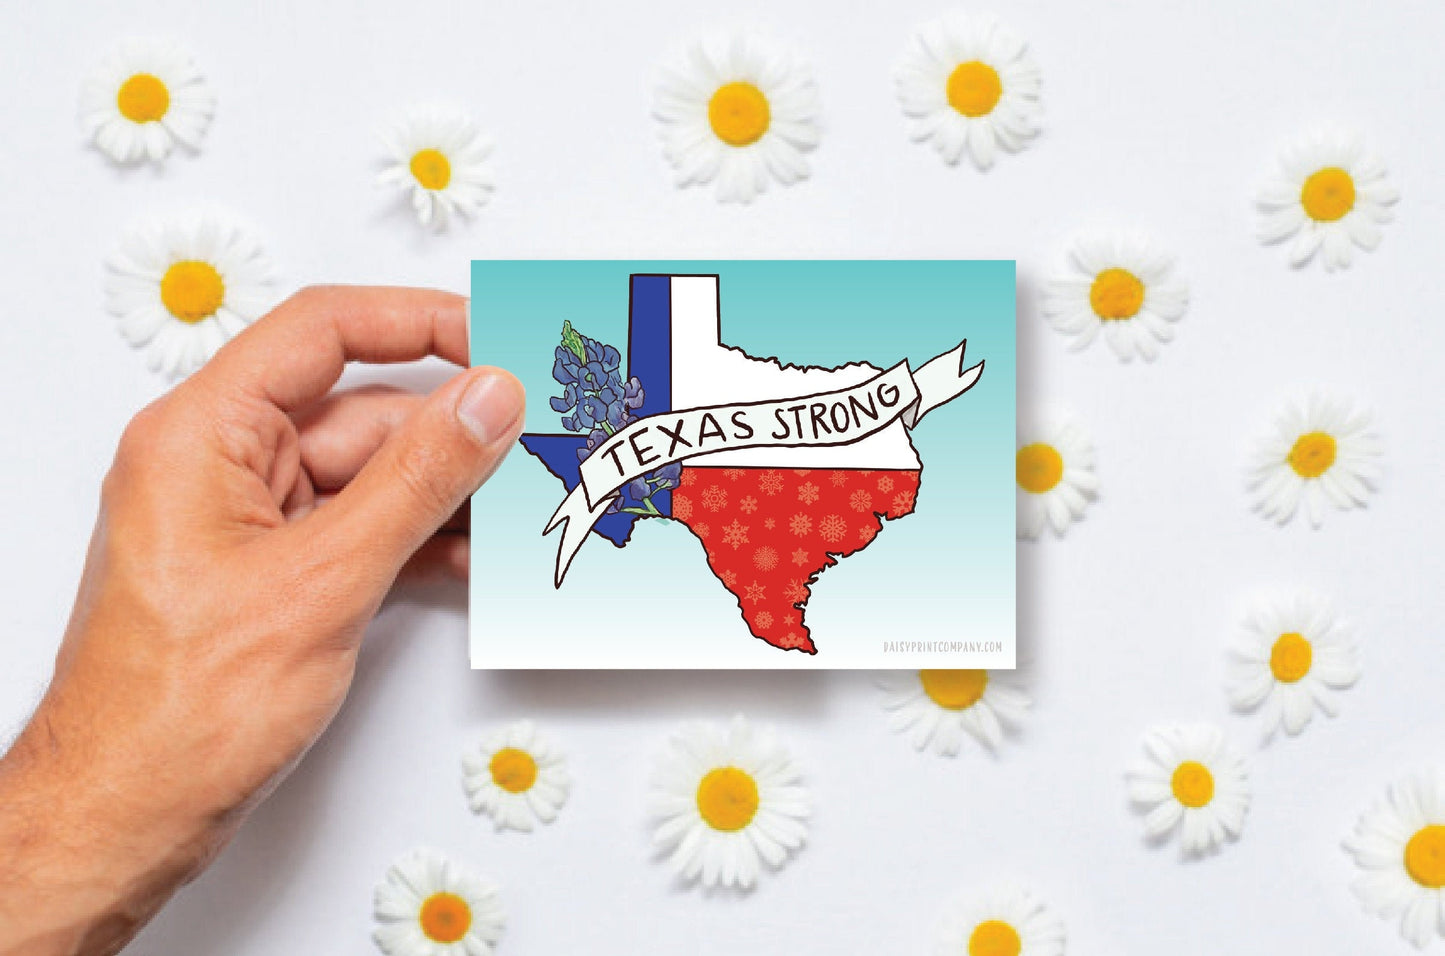 Texas Strong Sticker Fundraiser! - Support the Residents of Texas Affected by the Severe Winter Weather and Power Outages